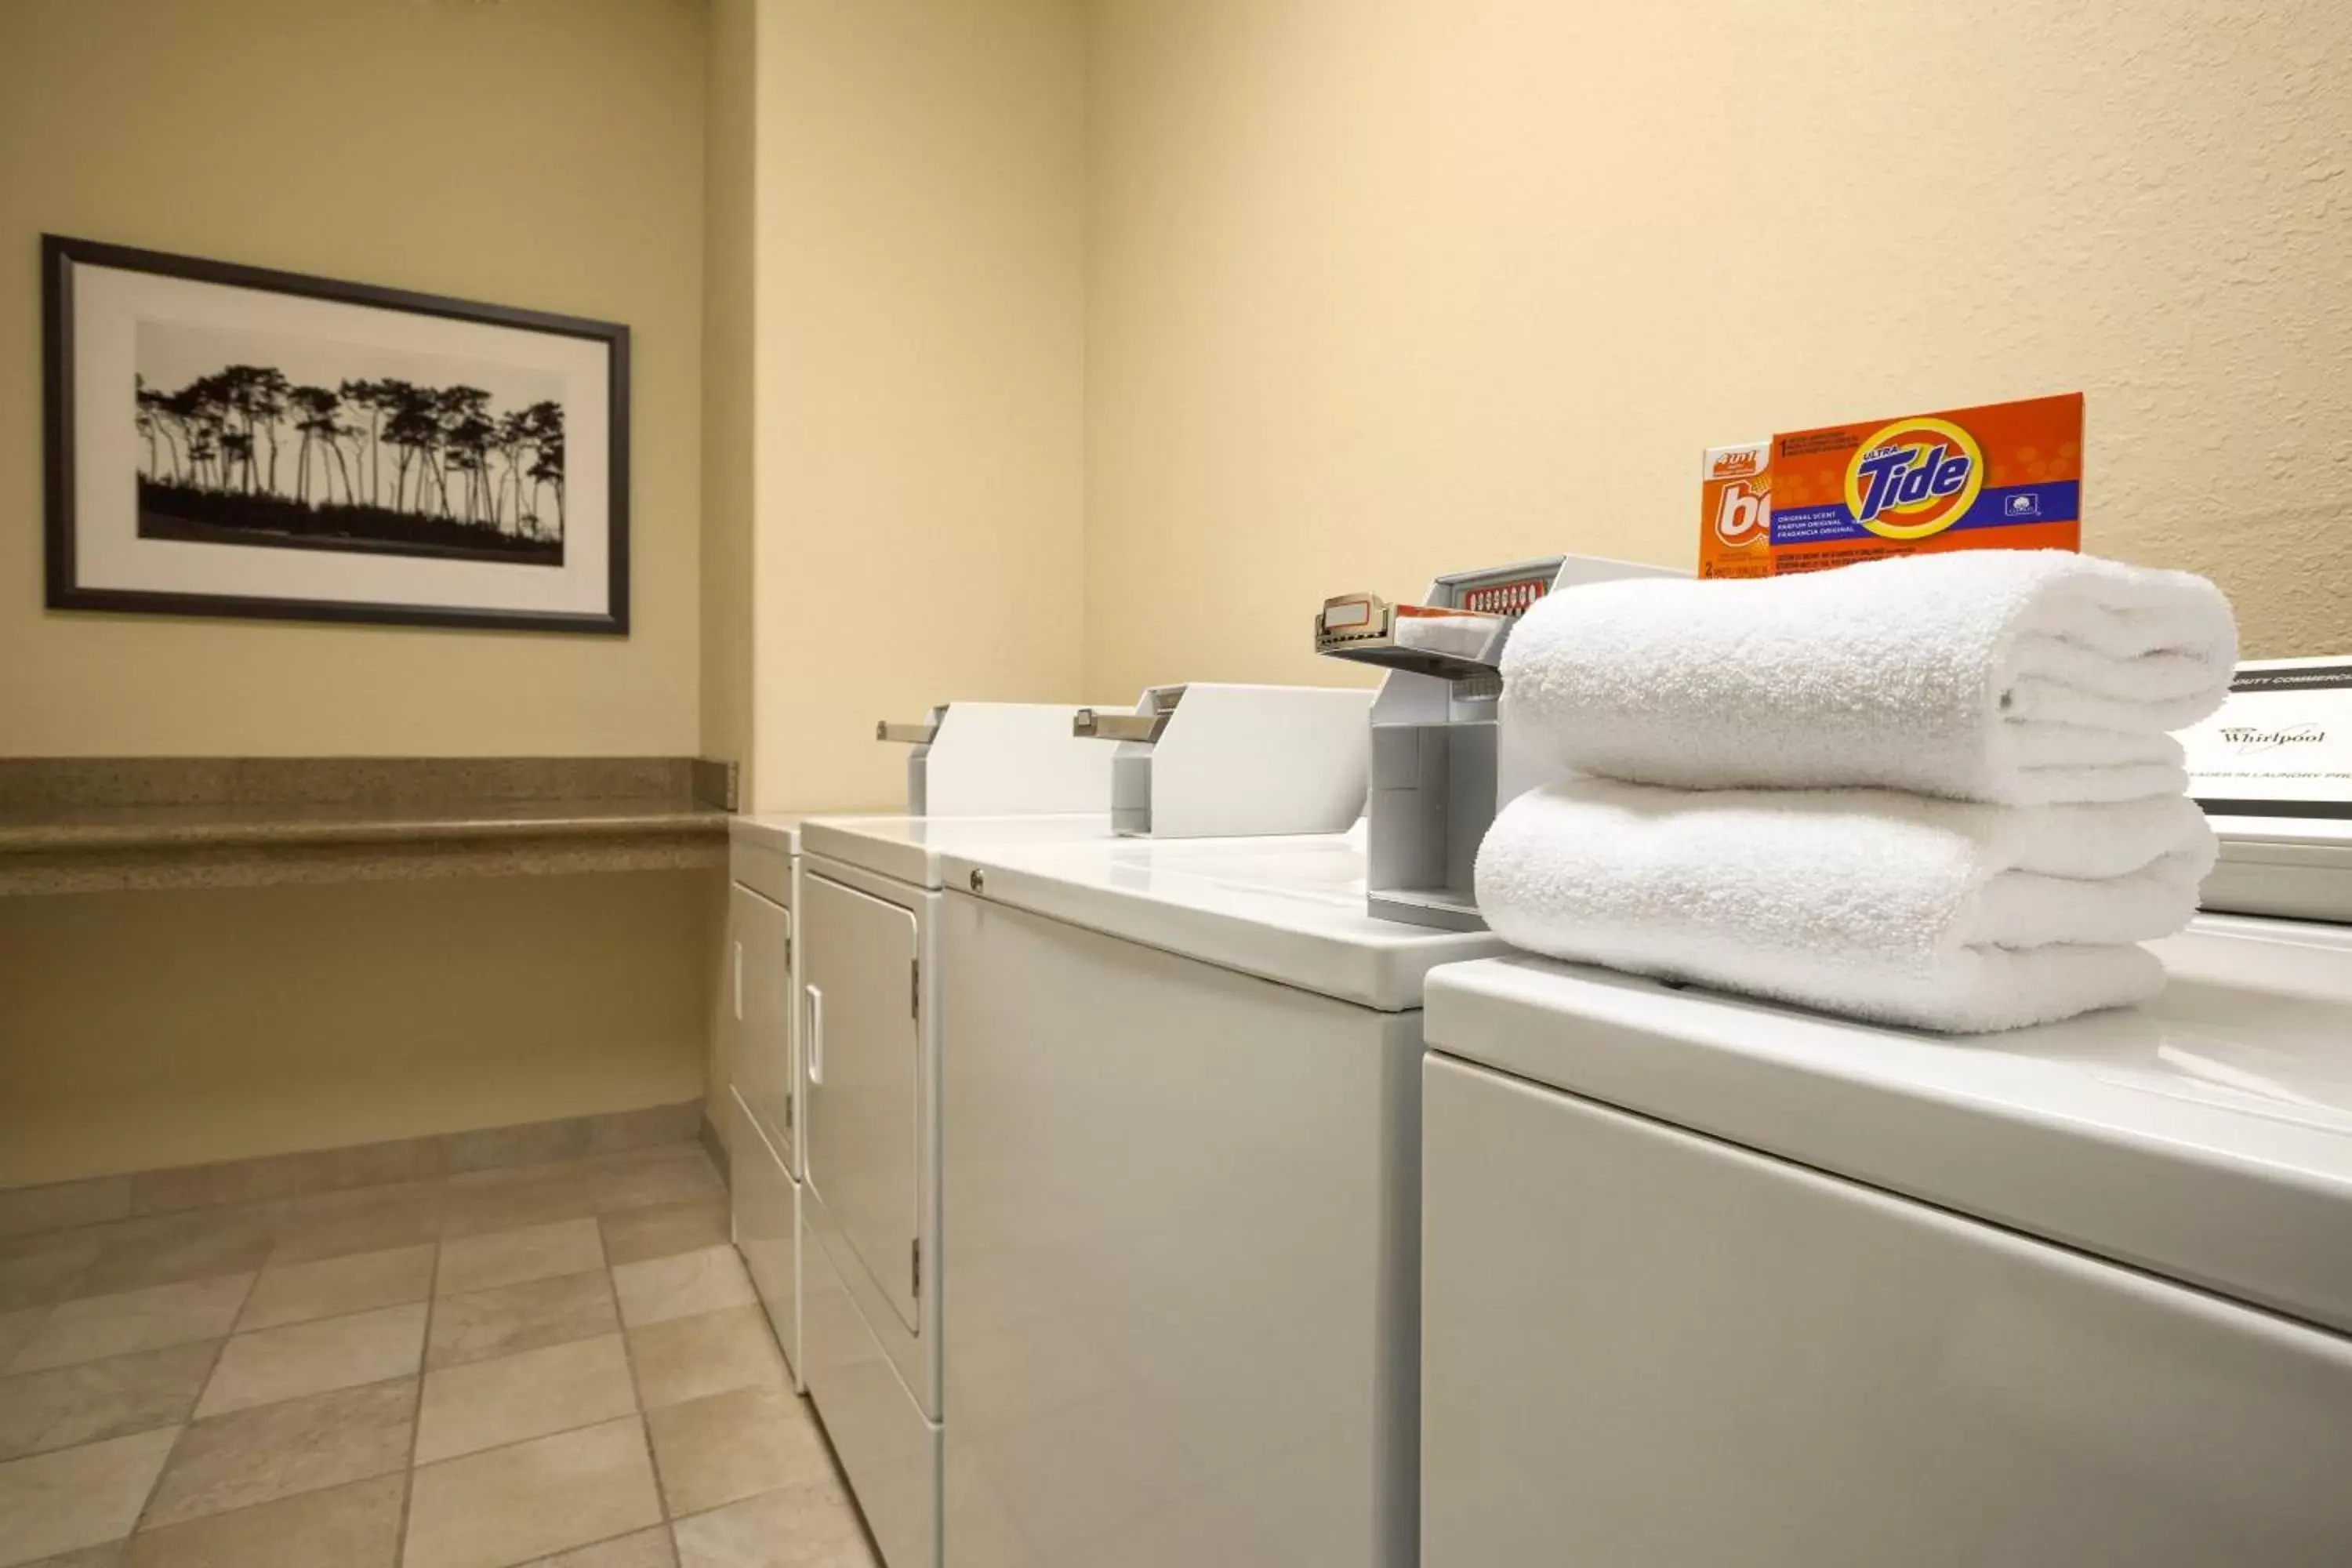 Area and facilities in Country Inn & Suites by Radisson, Sioux Falls, SD